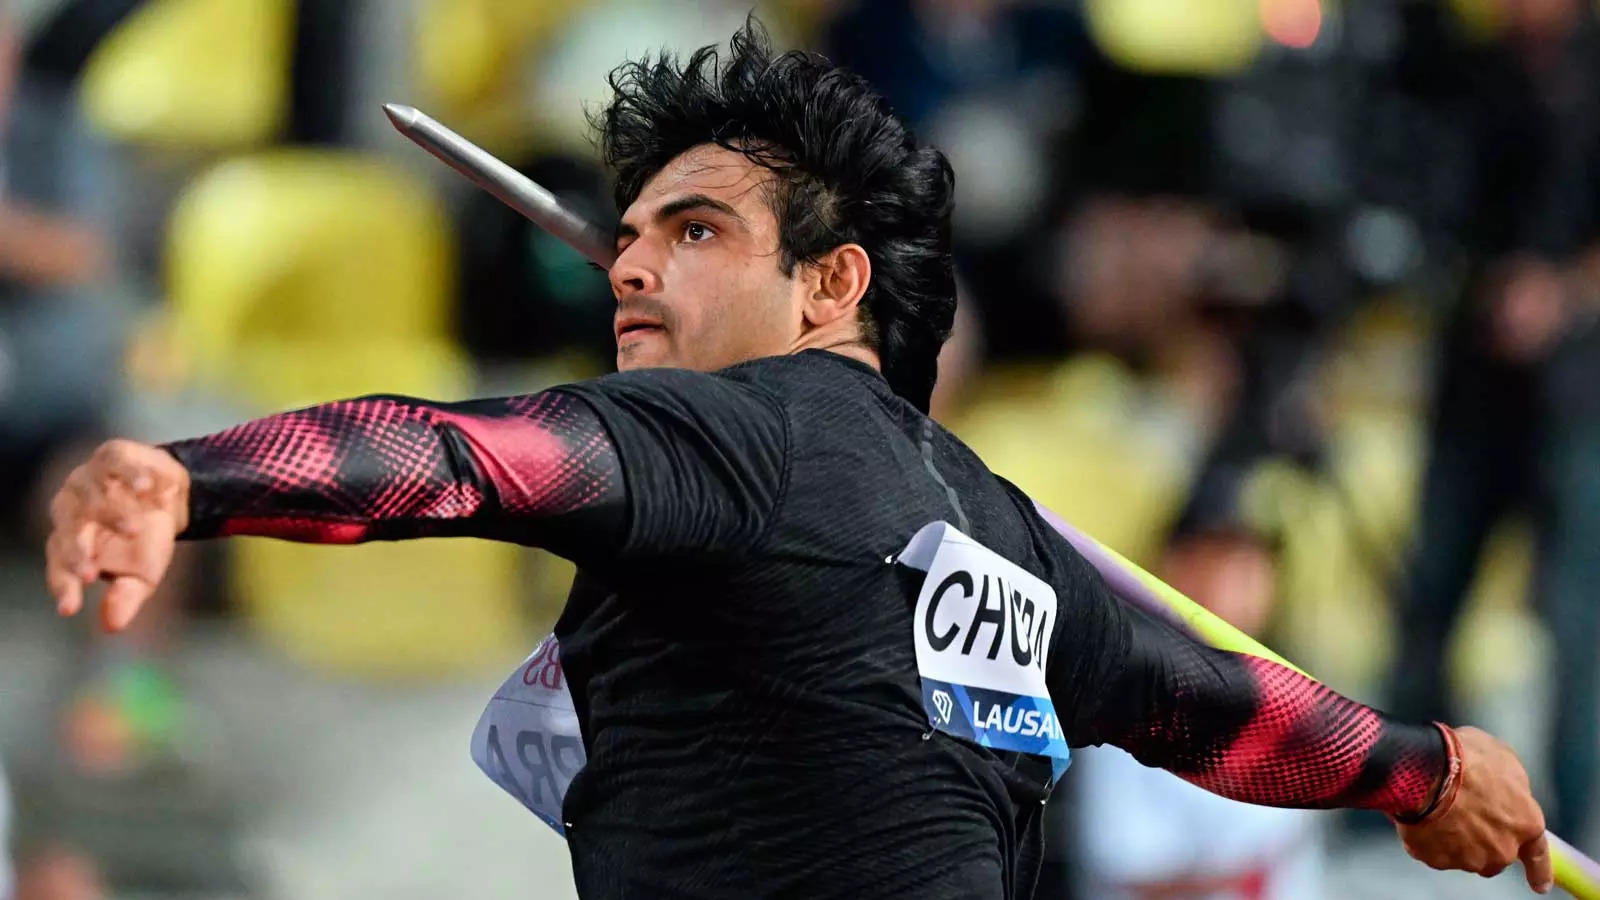 Neeraj Chopra is one of the 6 finalists in Javelin throw event at Diamond League finals 2022